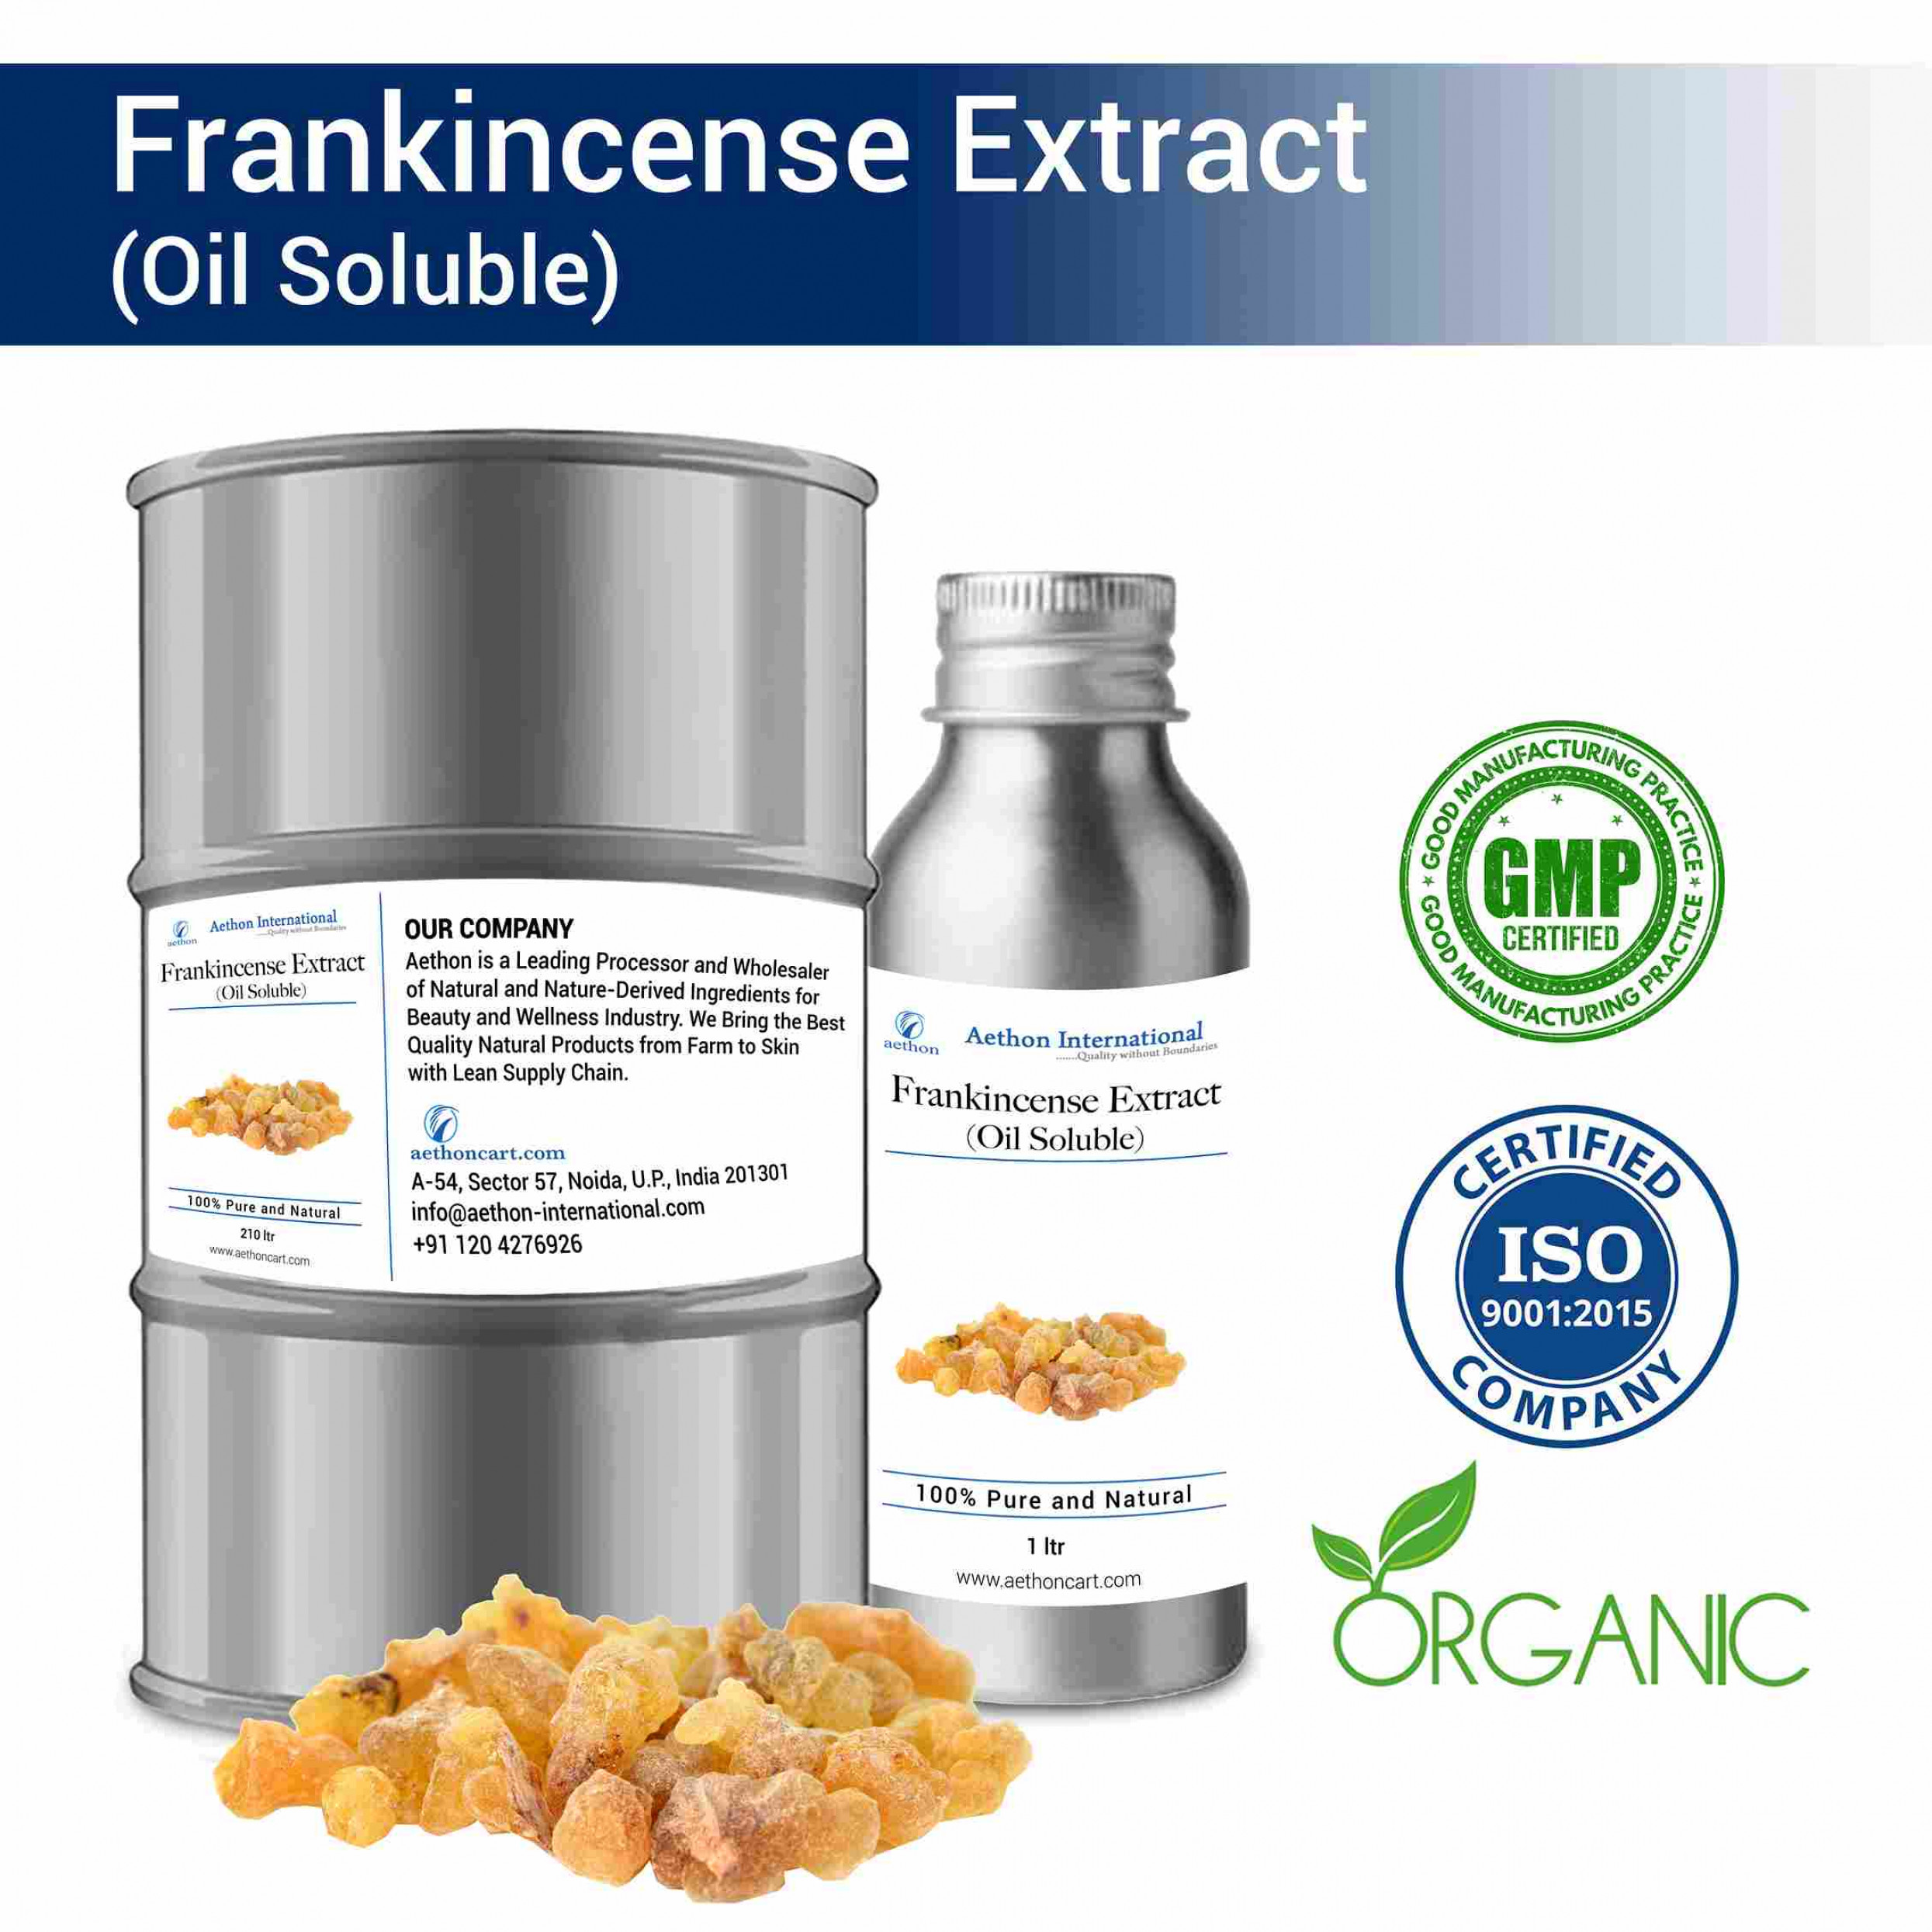 Frankincense Extract (Oil Soluble)